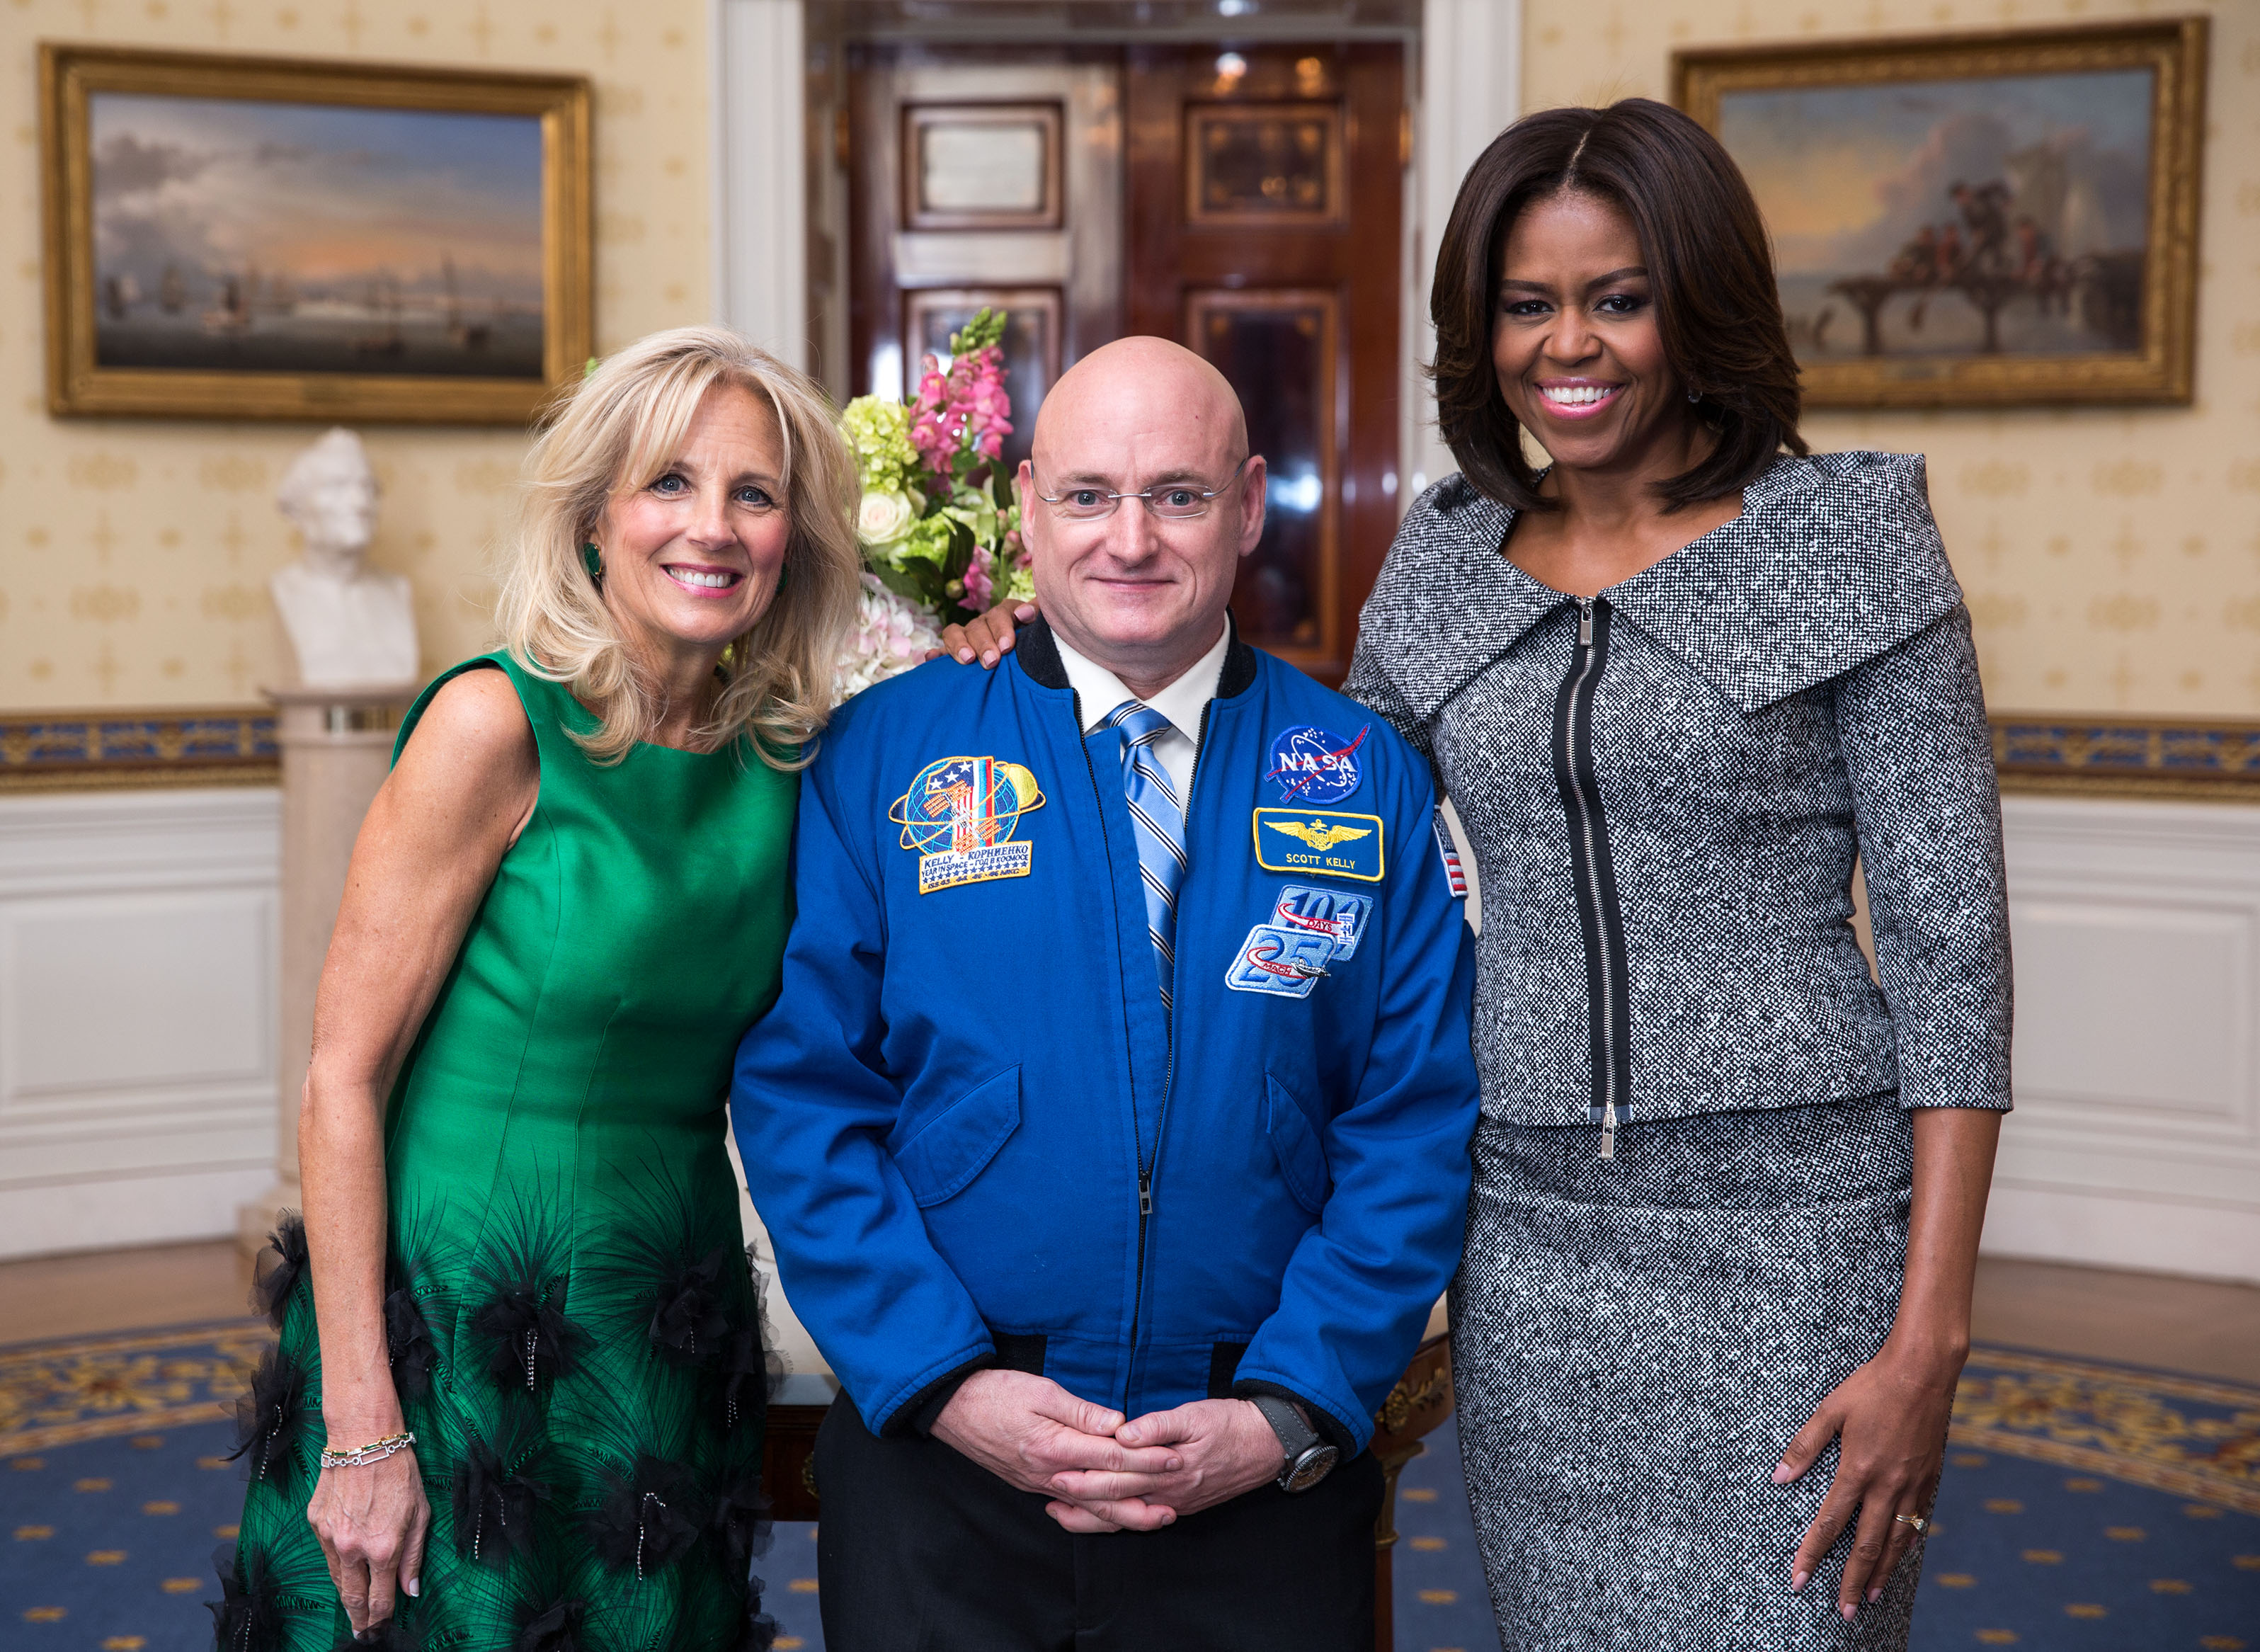 First Lady Michelle Obama and Dr. Jill Biden greet Scott Kelly, First Lady's State of the Union box guest, in the Blue Room of the White House, Jan. 20, 2015